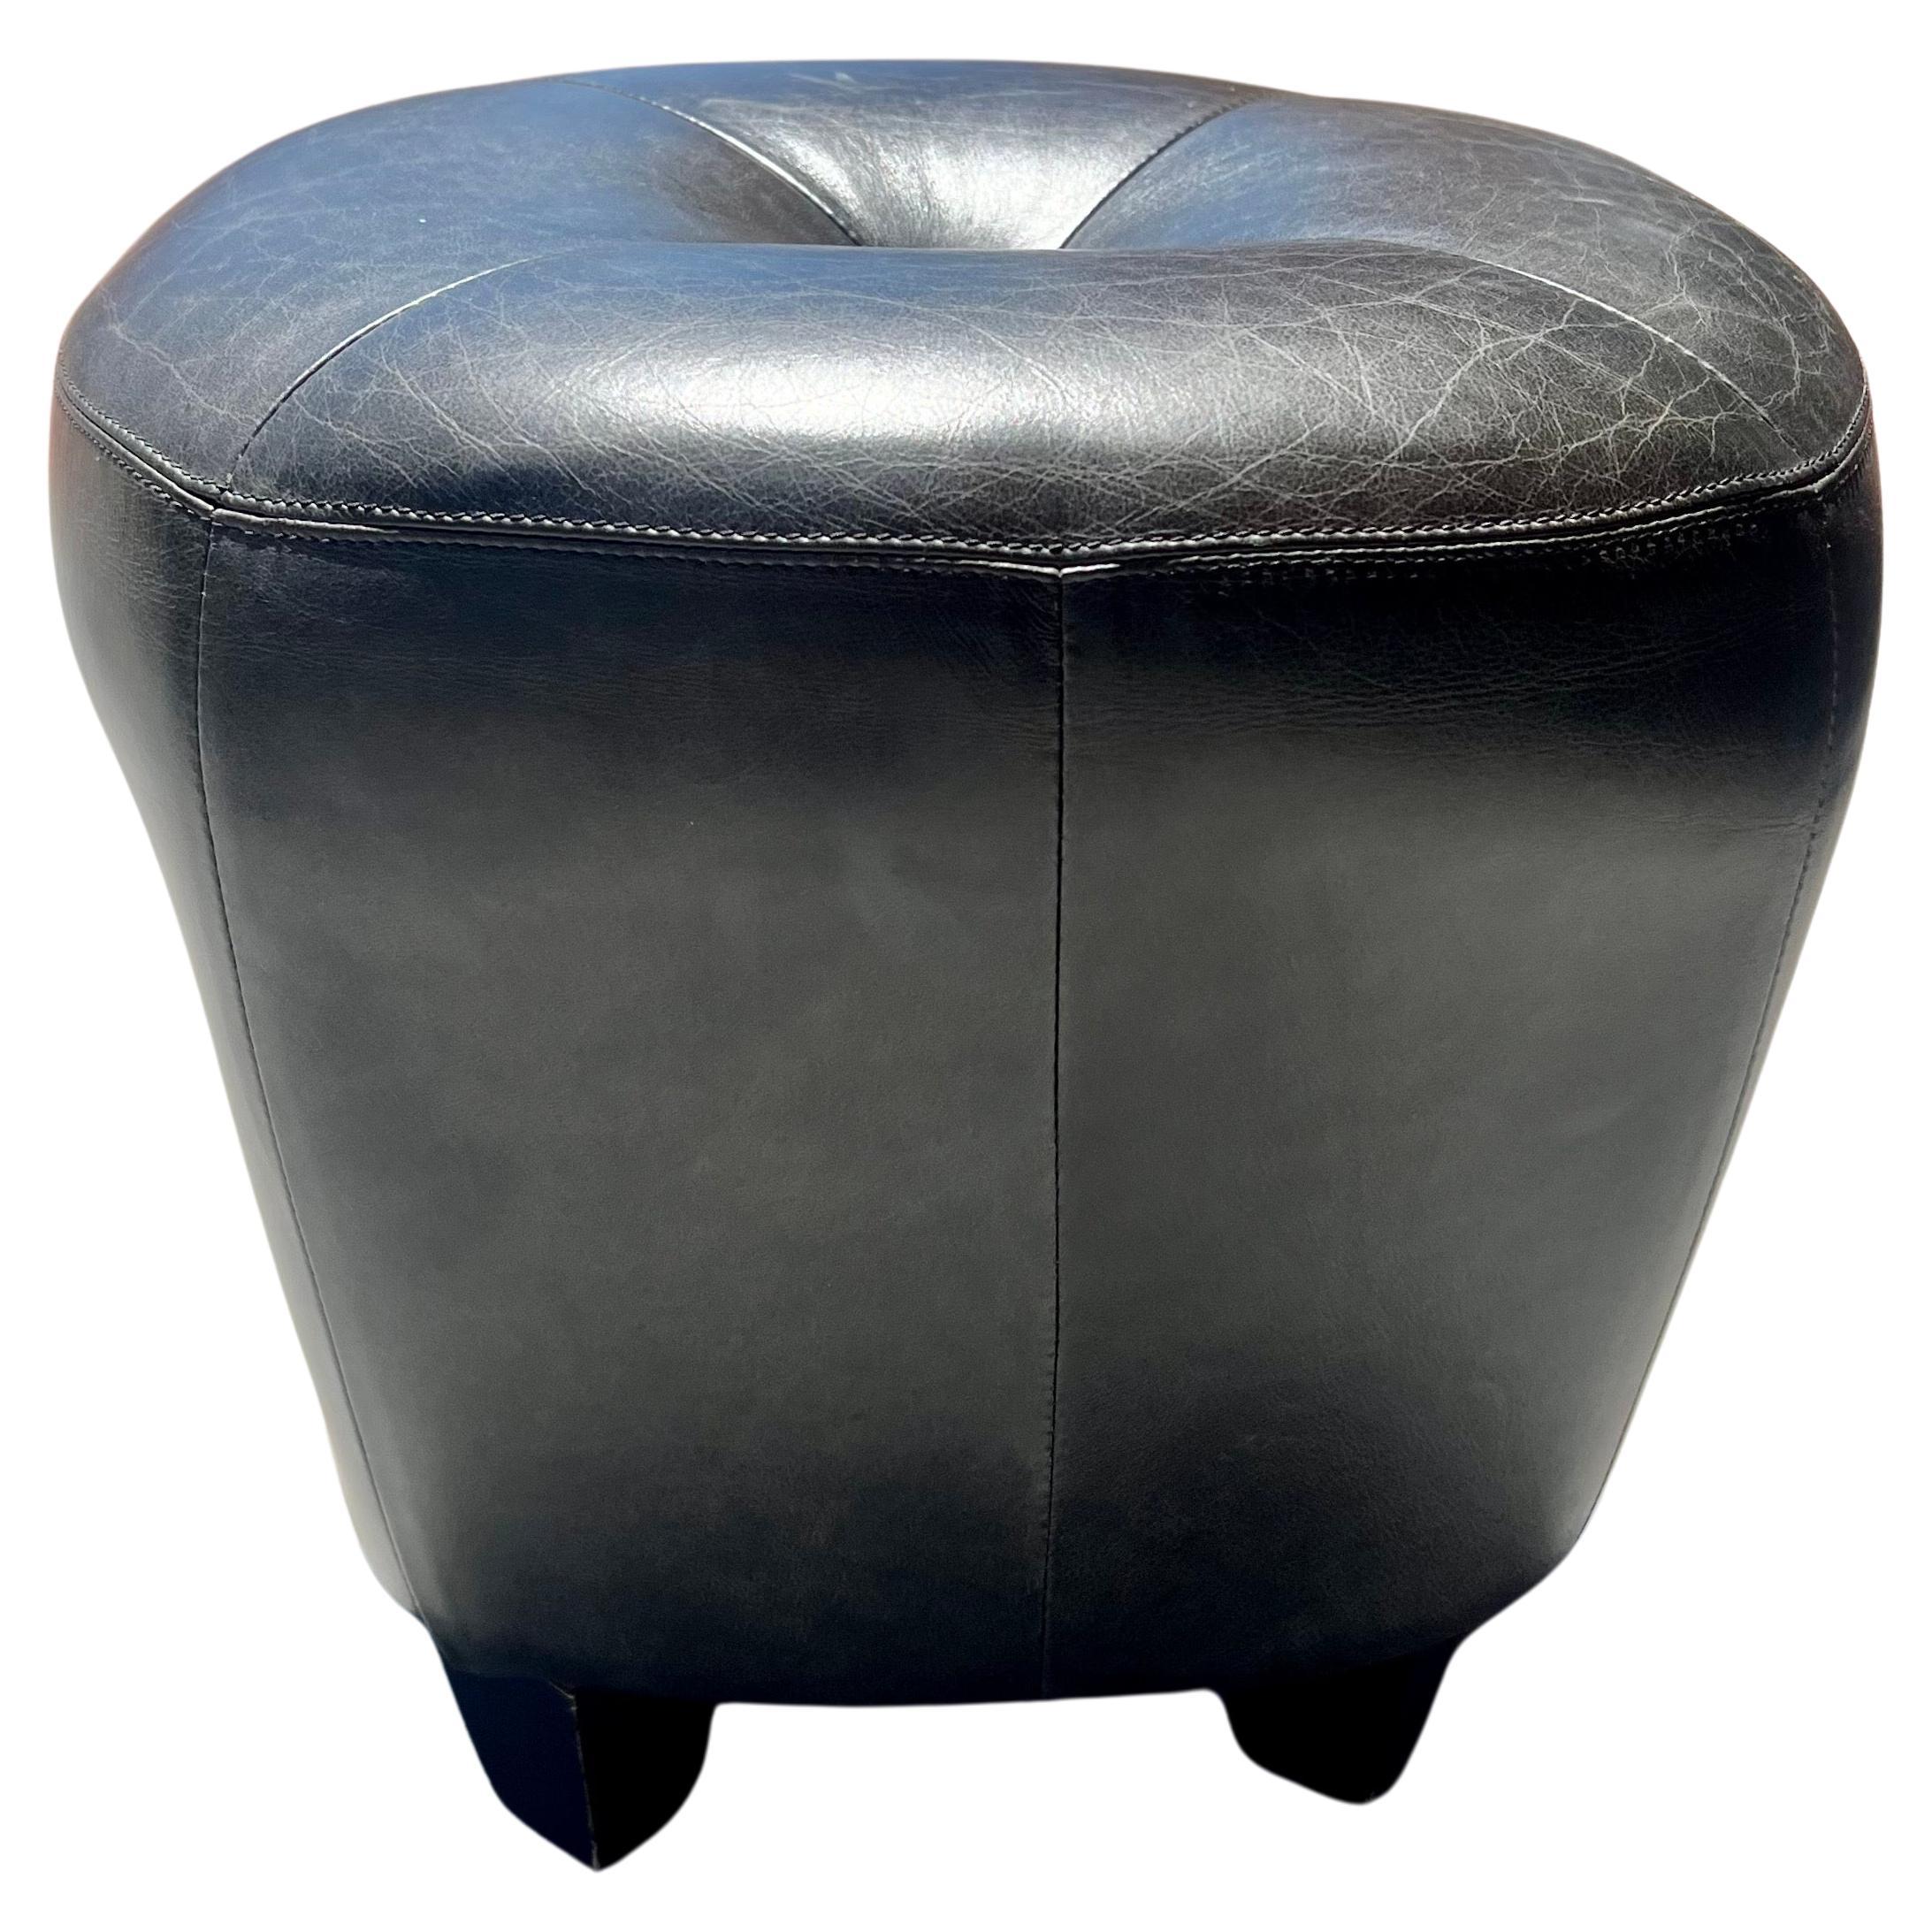 Elegant pair of black leather stools , ottomans or poufs , great condition leather with hand stiched finish and black lacquer wood legs, by Cisco & Bros .